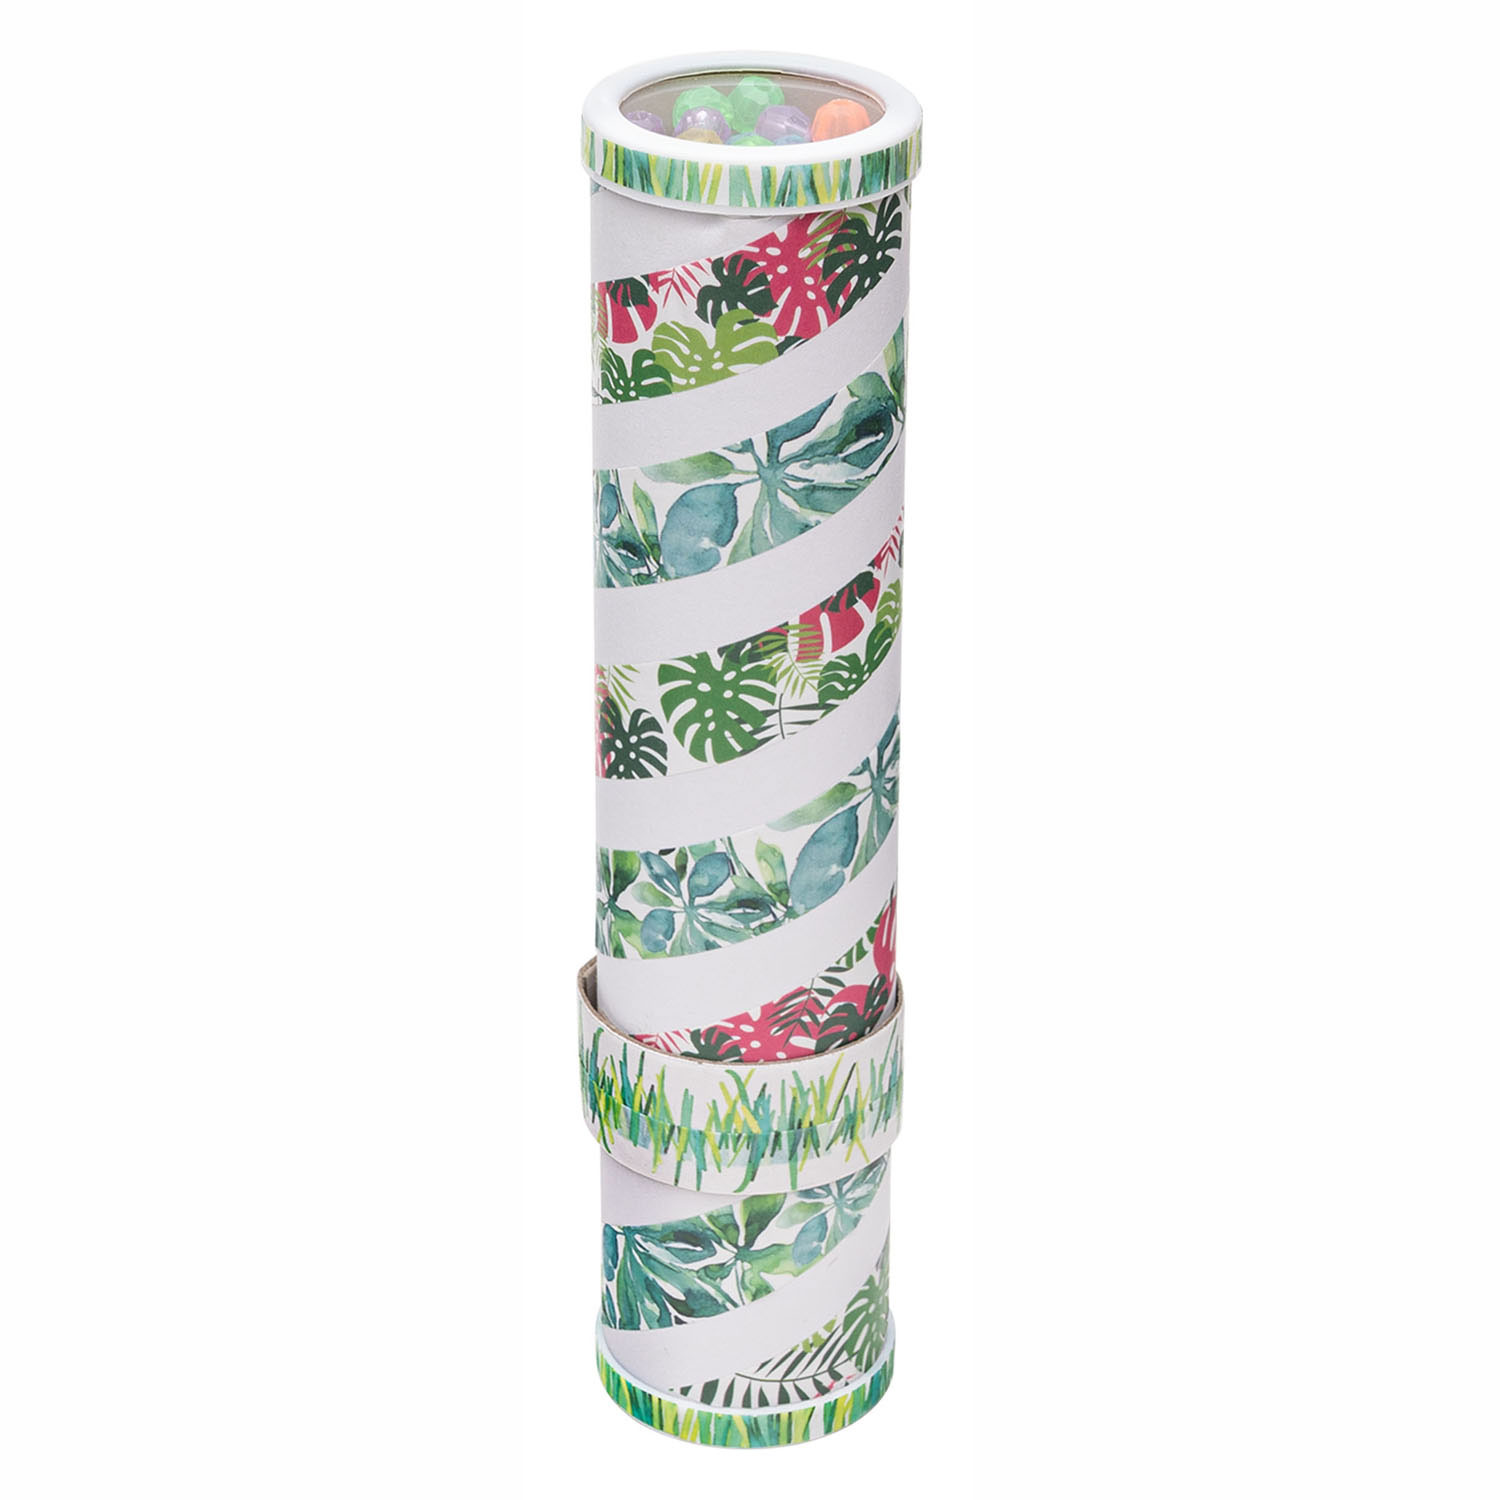 Colorations - Washi Tape Plants 3 Rollen, 5mtr.